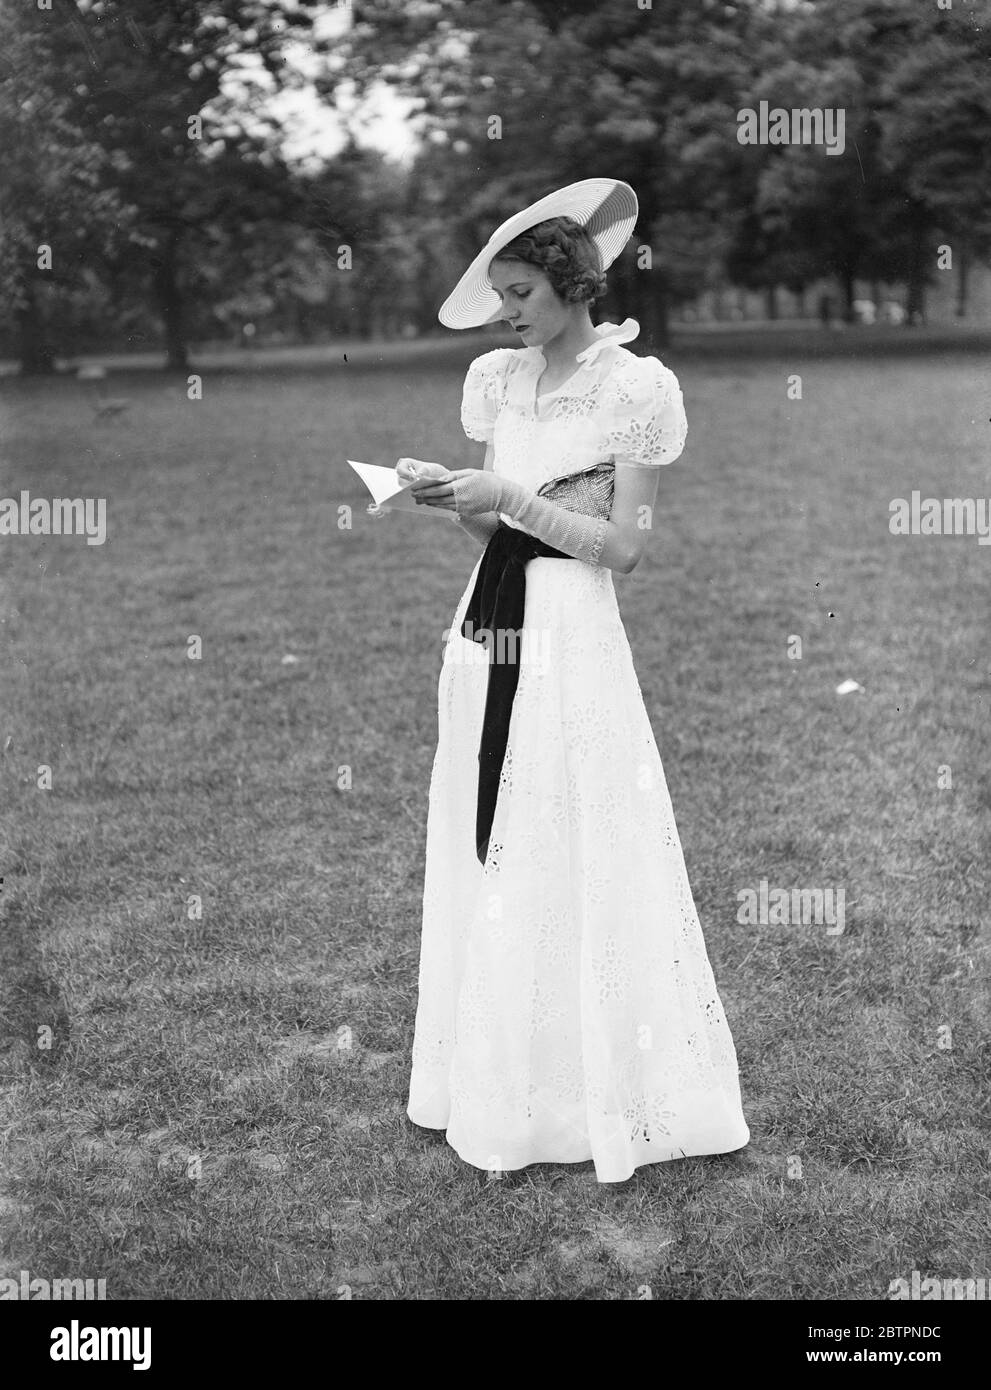 New fashion for Ascot. One of the lovely fashions designed by Ulick Philippe of London for ascot, which opens next week. The dress is of white broad broderie Anglais loosely draped with a red velvet sash. The wide, wide straw hat is trimmed with red velvet to match. 8 June 1937 Stock Photo